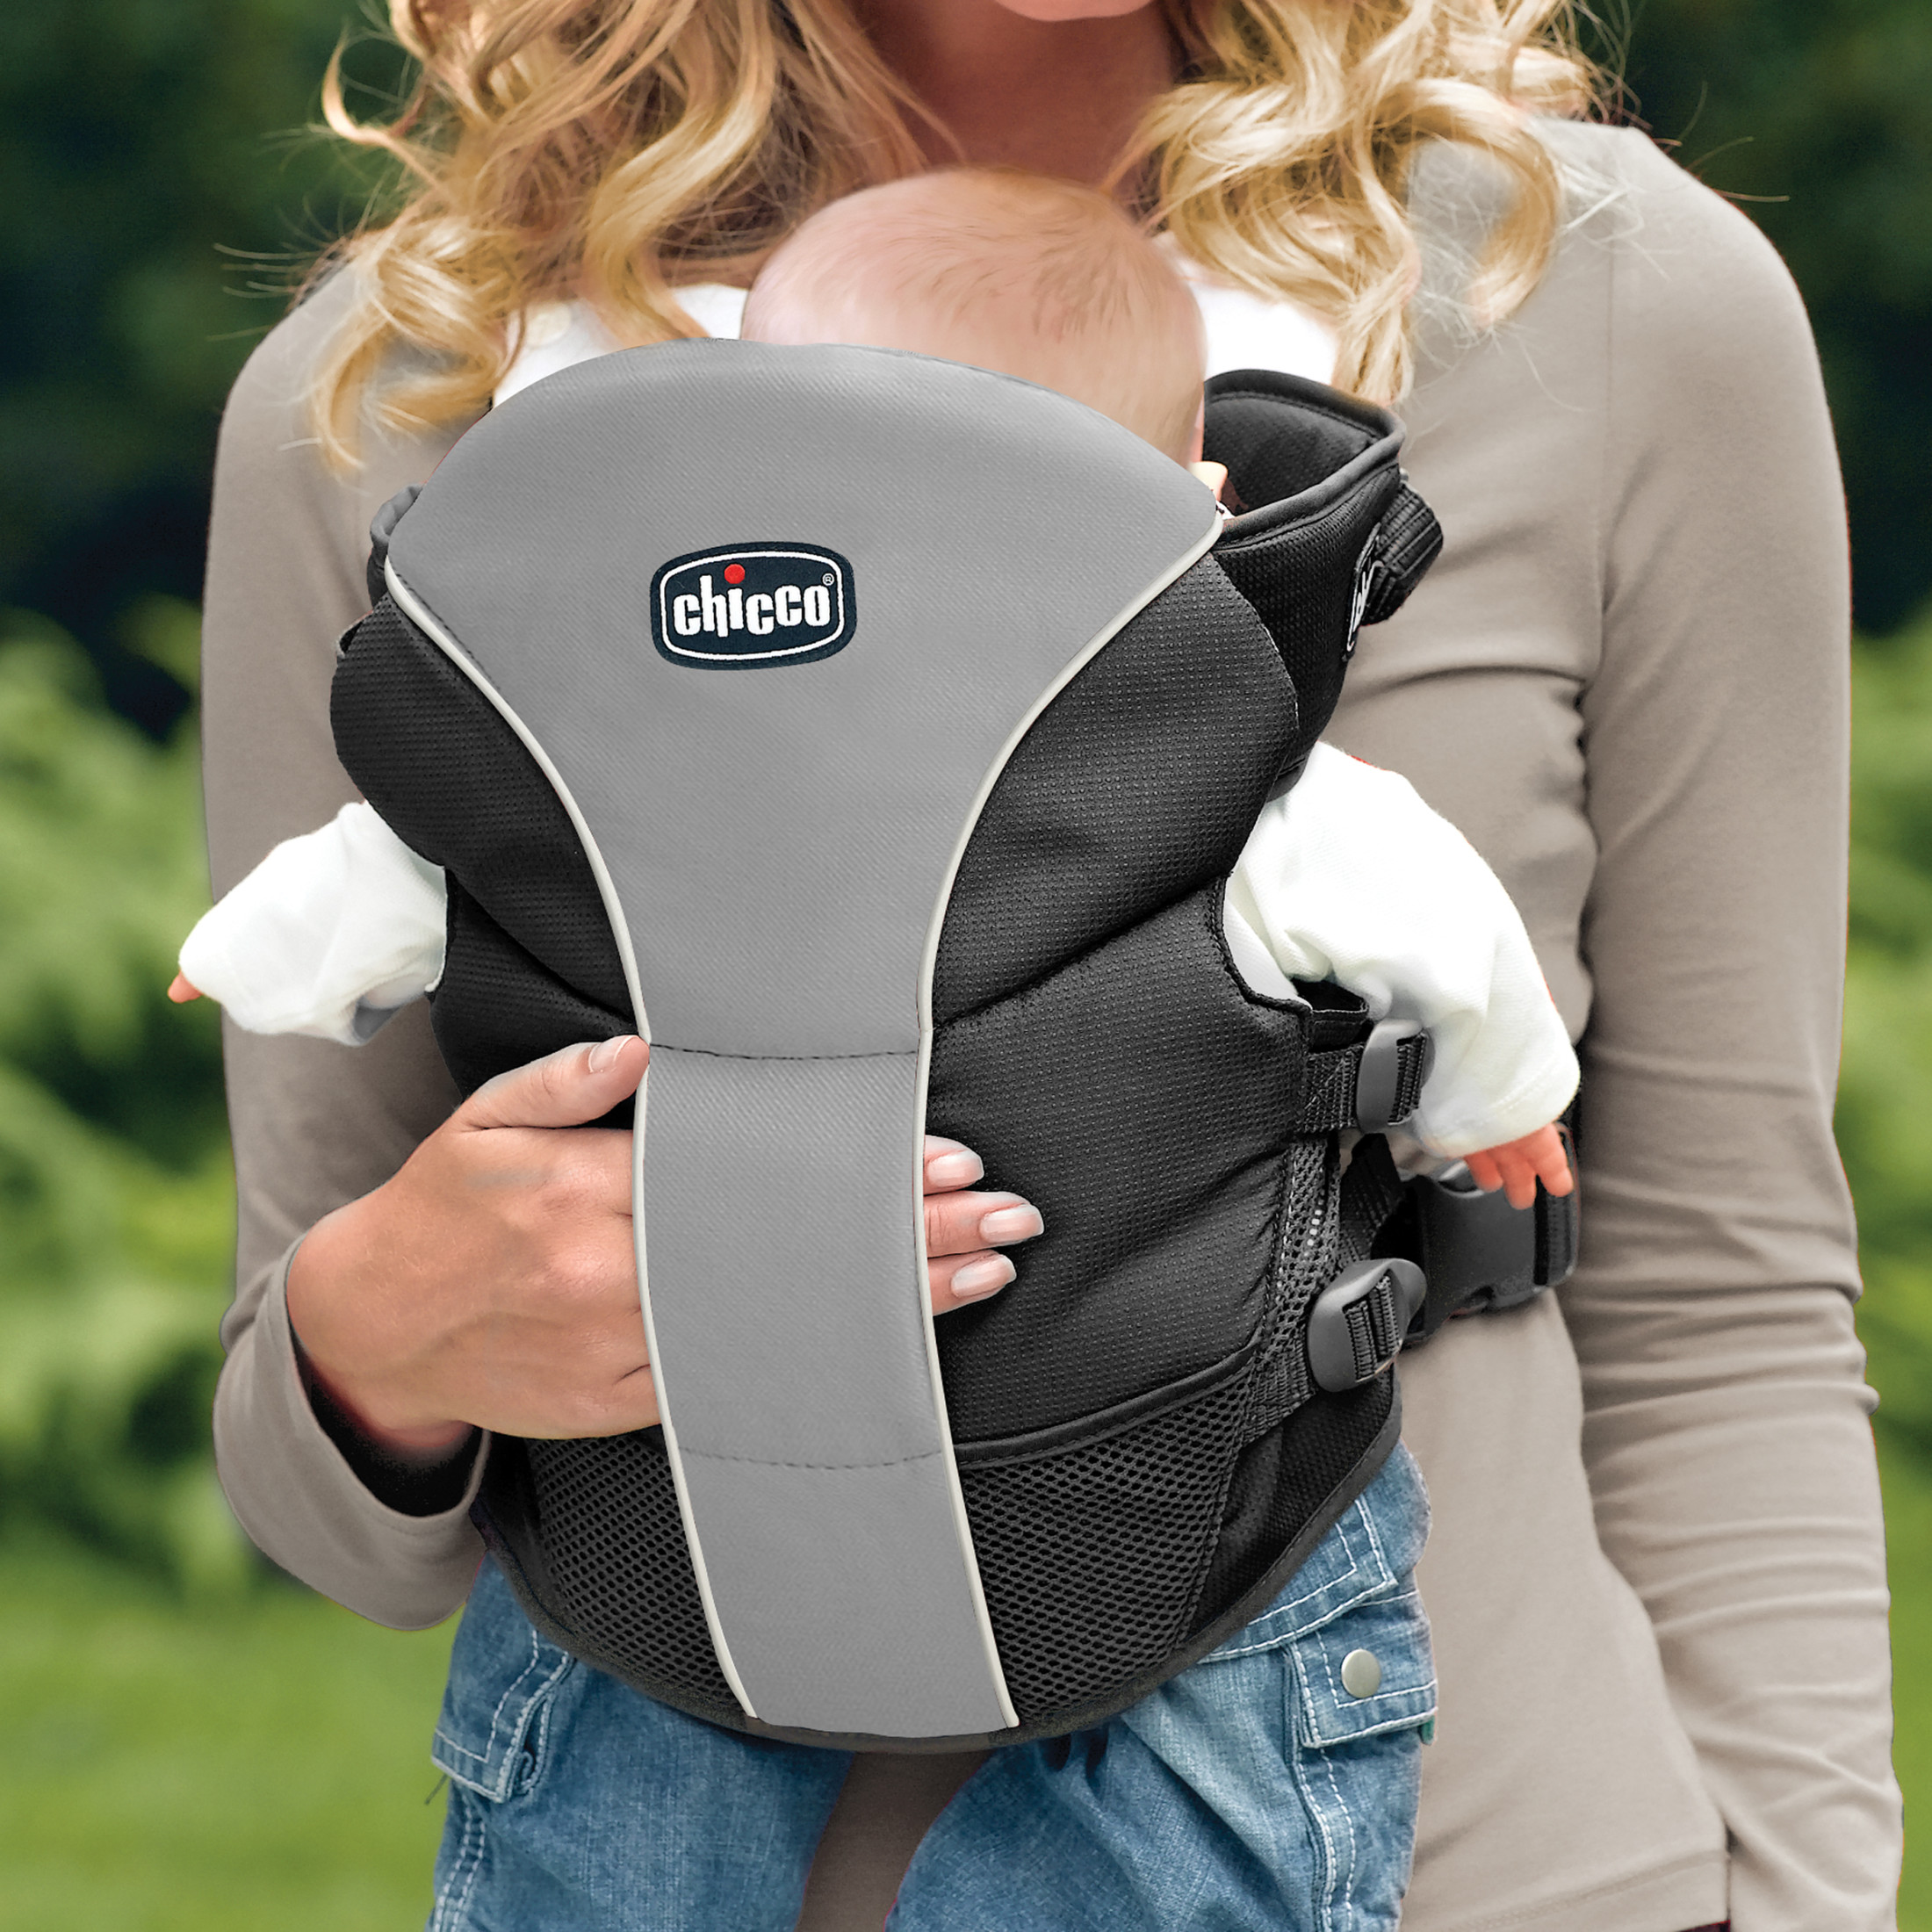 Chicco UltraSoft Infant Carrier - Poetic () - image 2 of 8